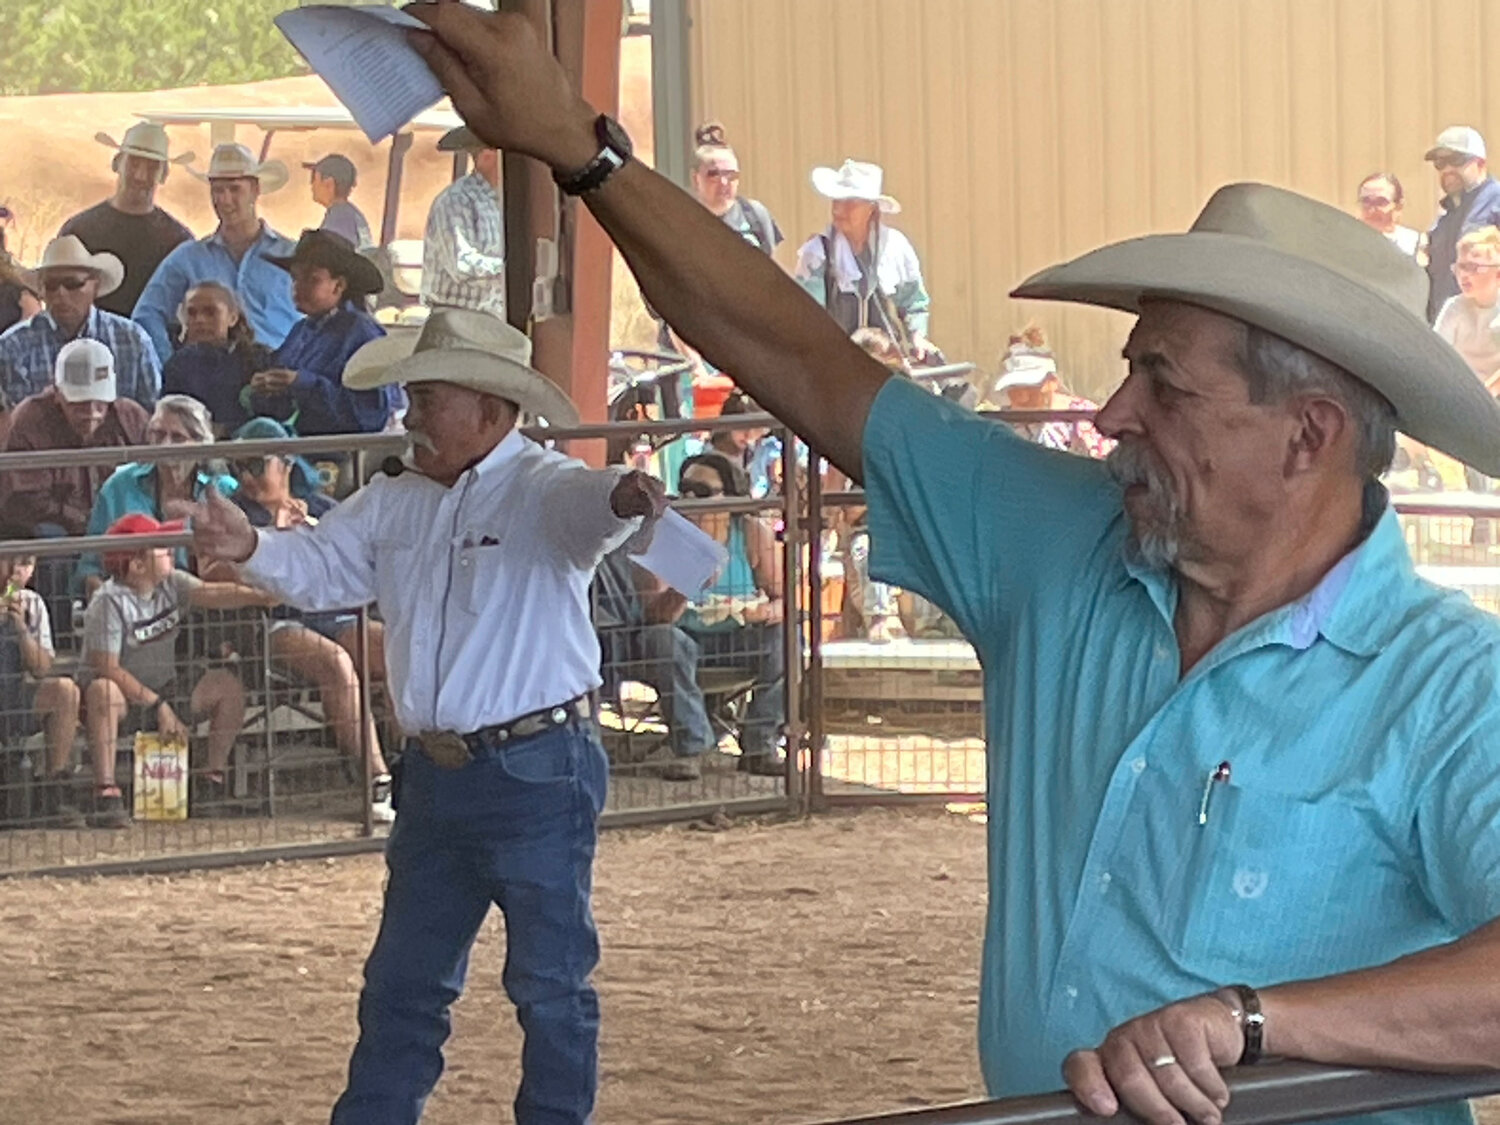 The Junior Livestock Auction is always one of the highlights of the county fair. Here, auctioneer Leroy Lovato (background) solicits funds with help from ring man Richard Herrera.